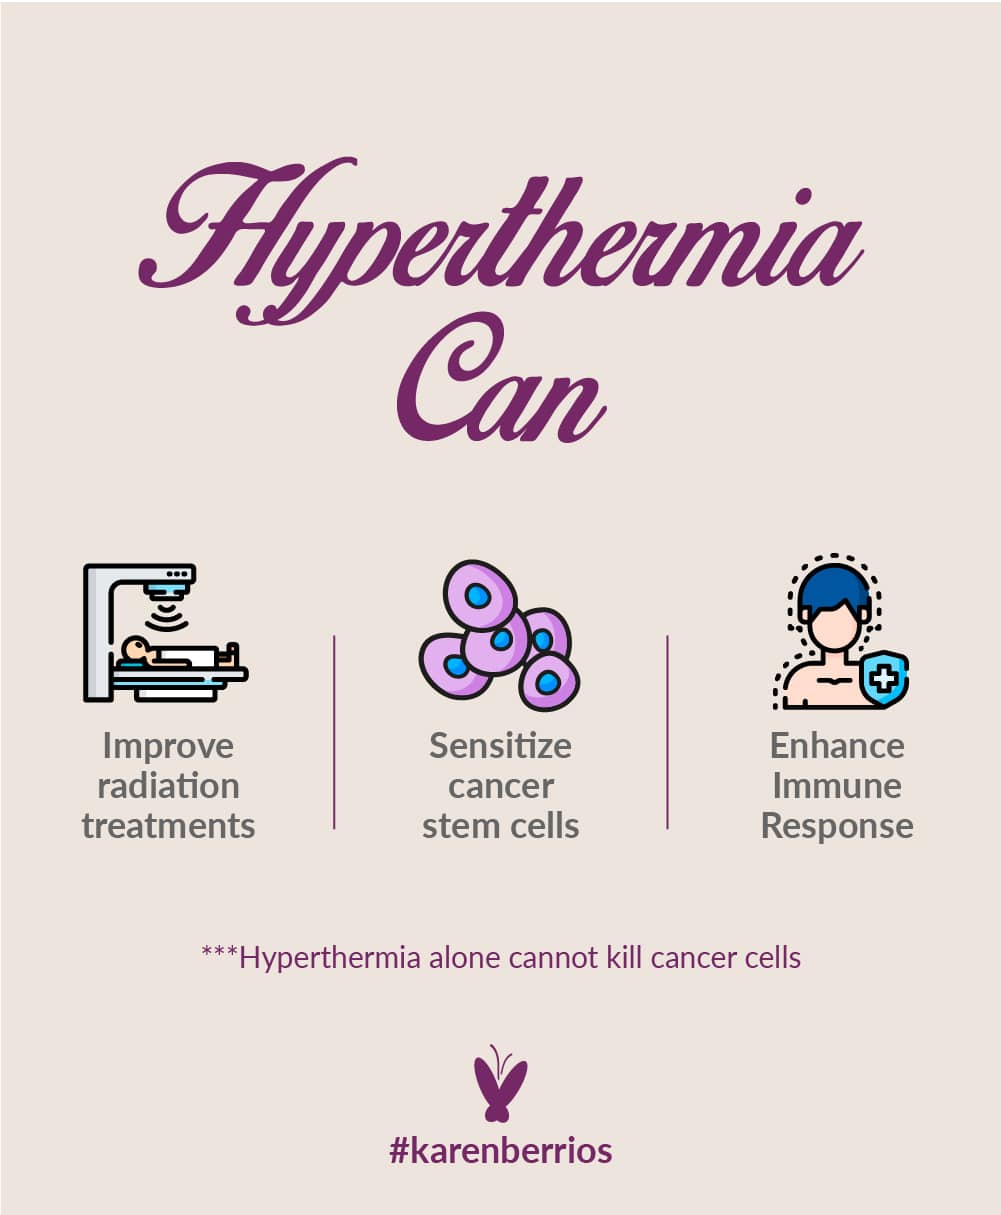 Can Hyperthermia Kill Cancer Cells?